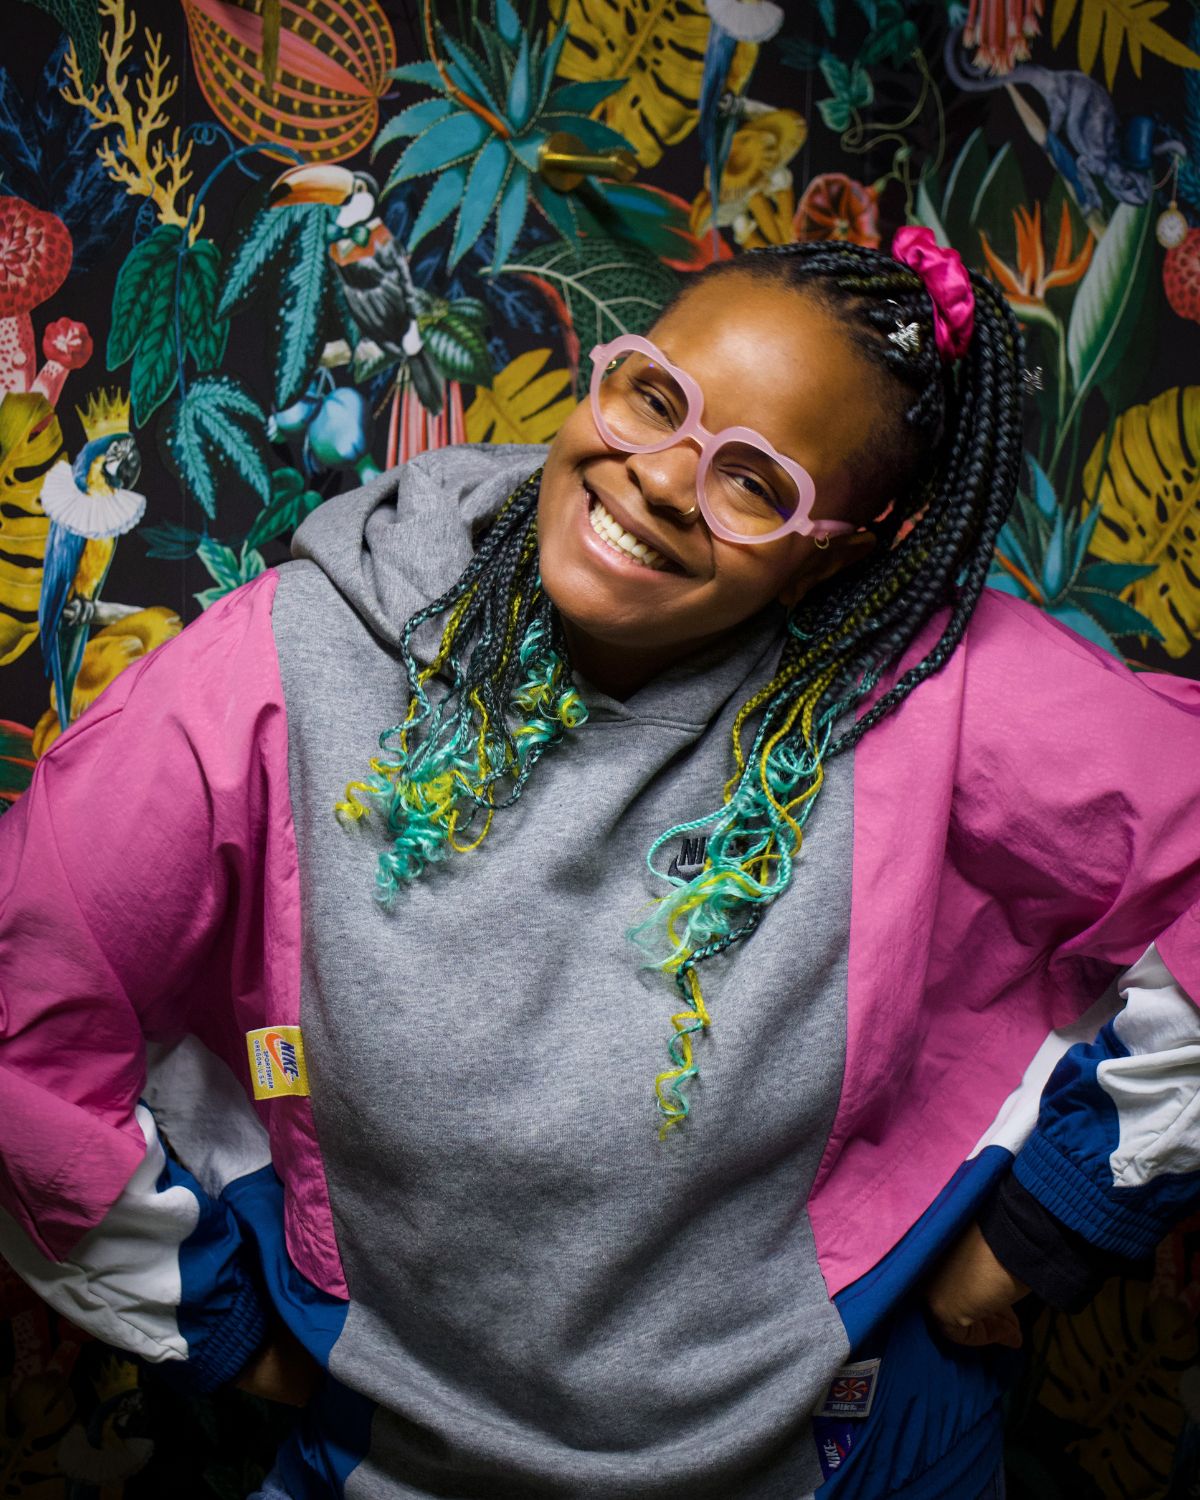 Portrait of Shanel Hughes posing with her hands on her hips in front of colorful wallpaper.